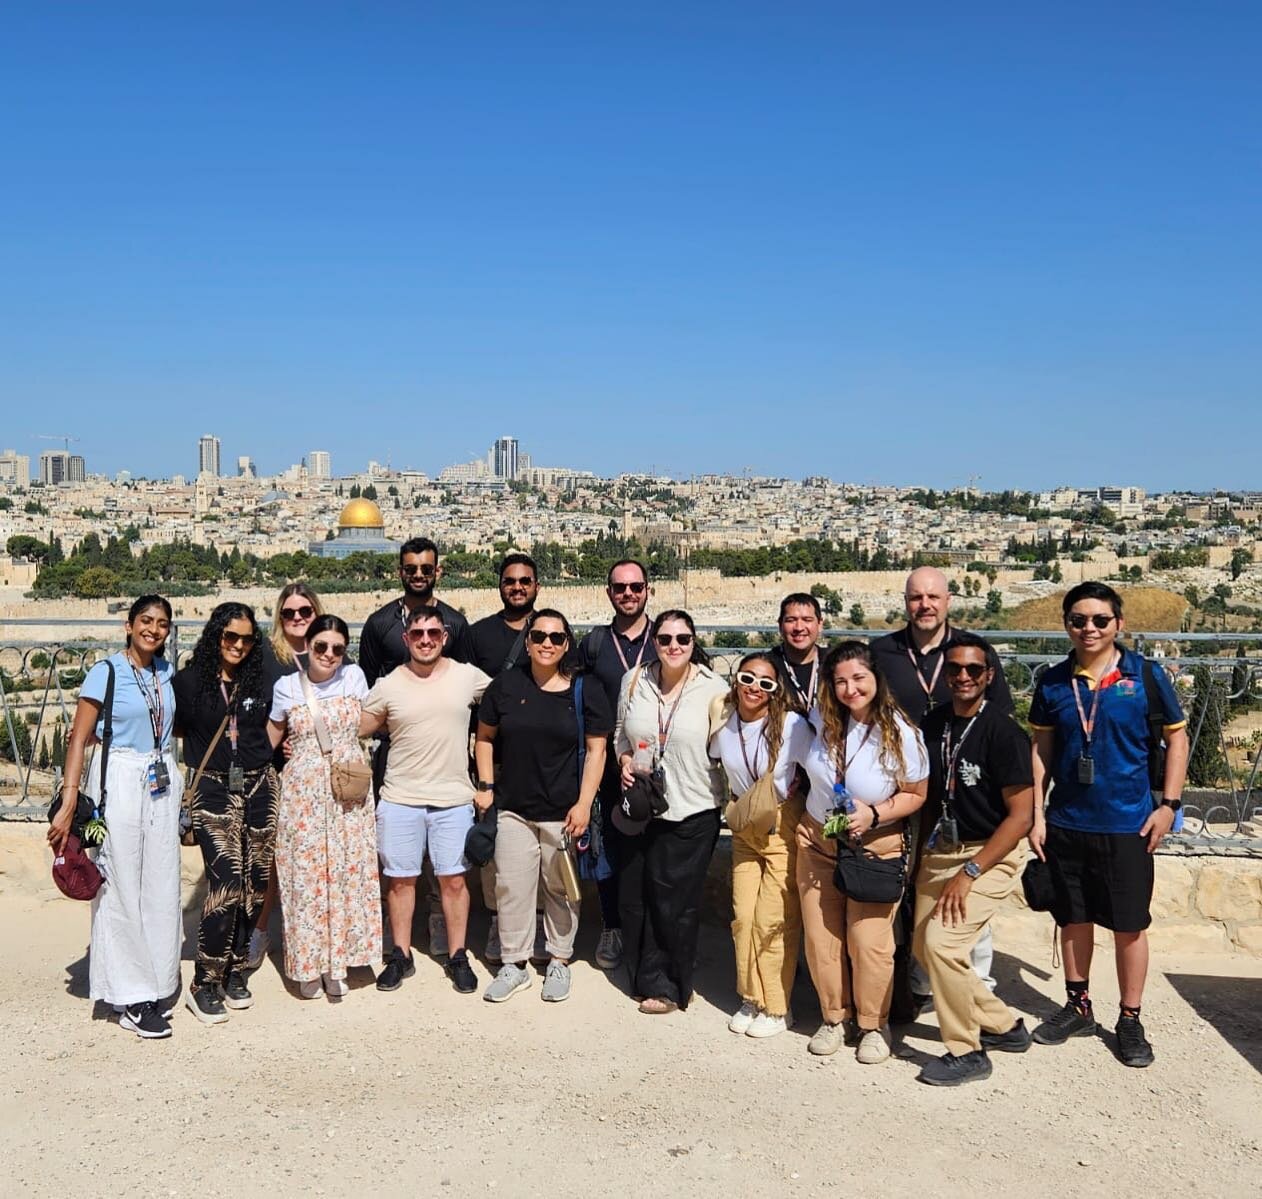 Our Holy Land journey has finally brought us to Jerusalem! Please continue to pray for us as we make our final journey in the footsteps of Jesus Christ, before joining the rest of the young people making their way to Portugal for World Youth Day!